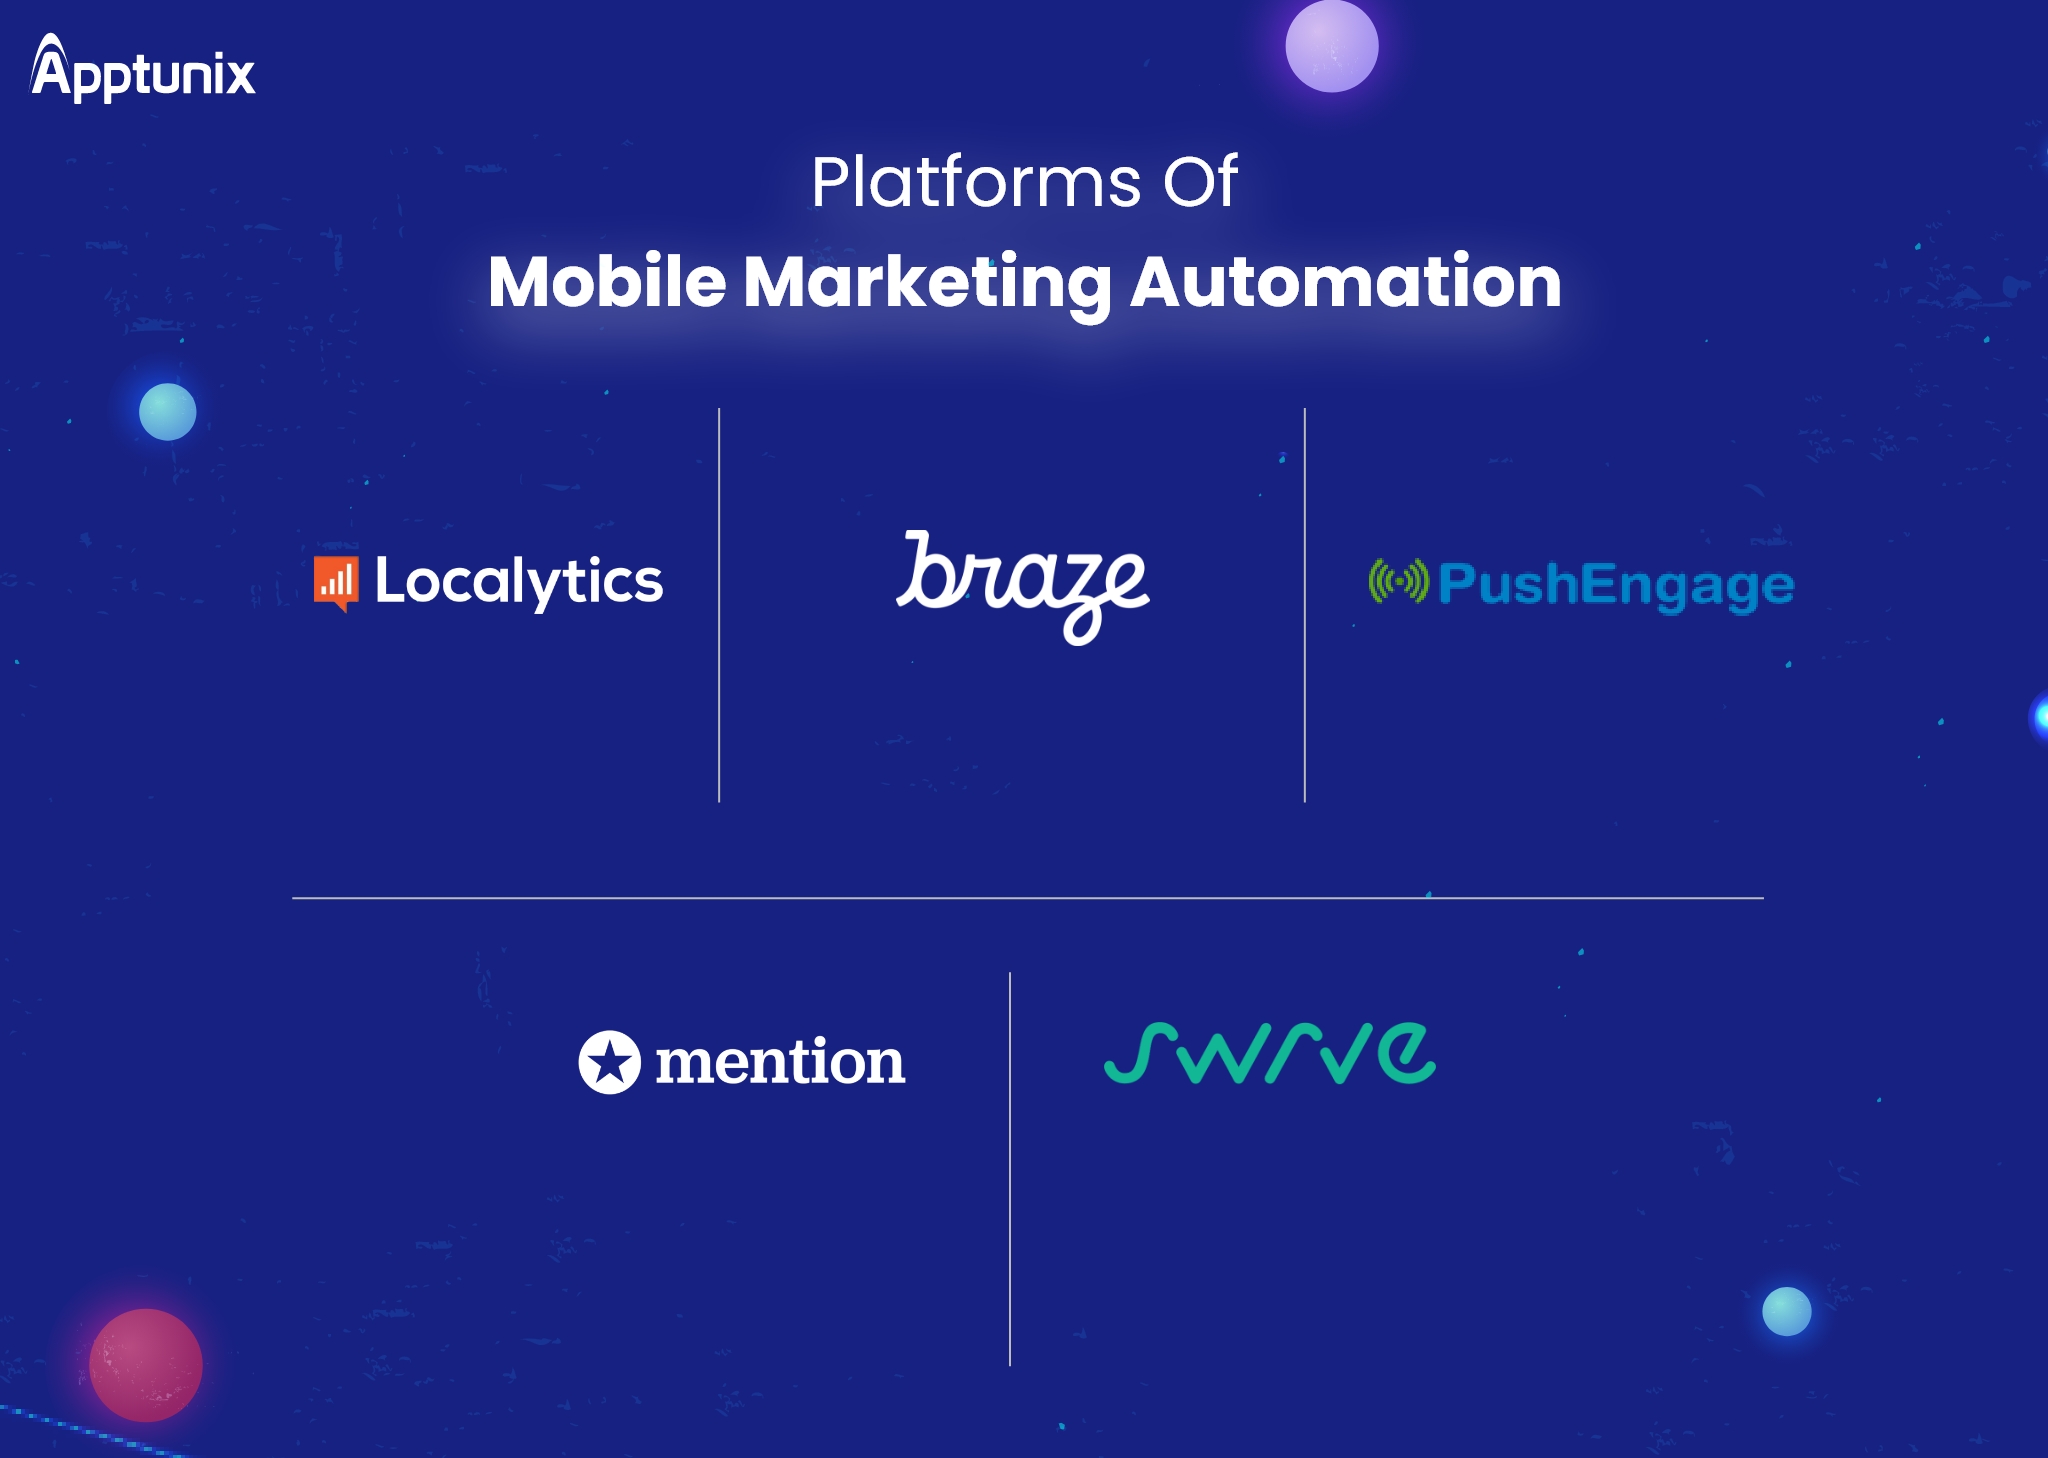 Platforms of mobile marketing automation